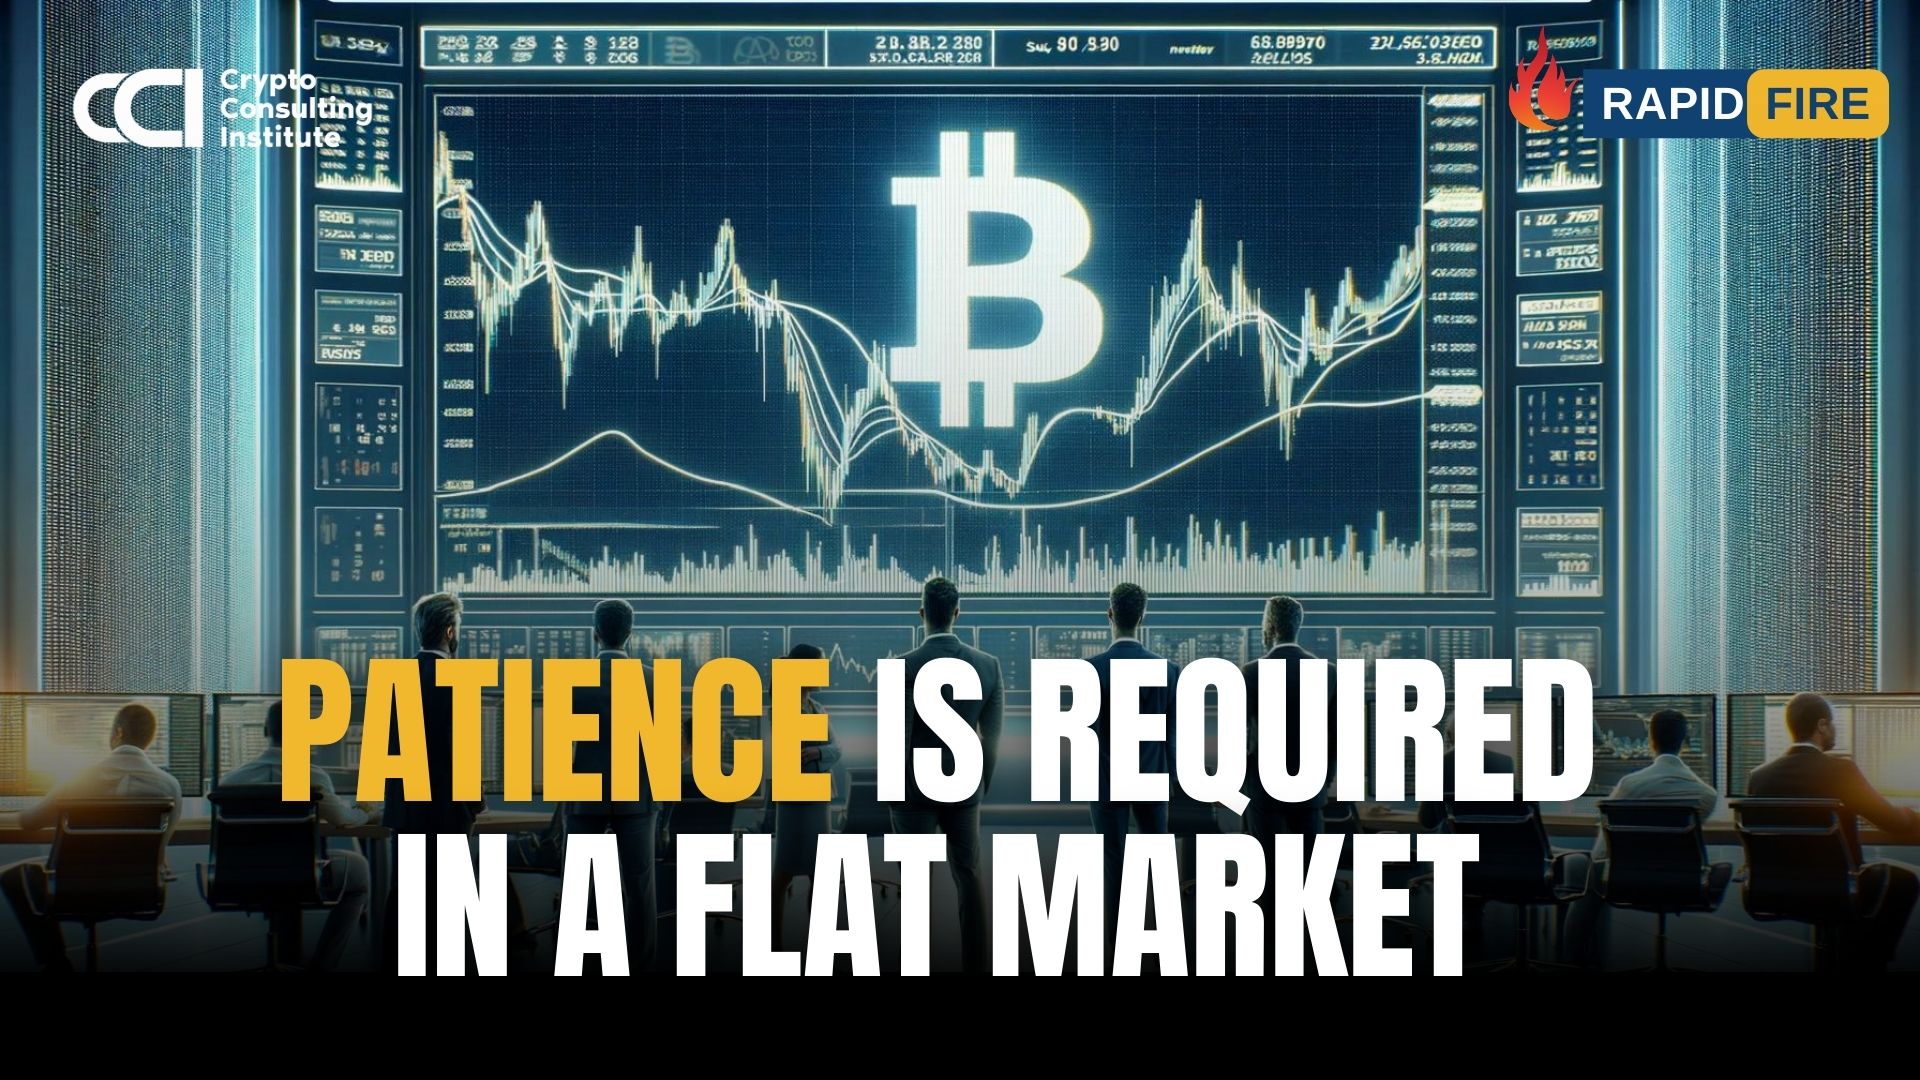 Patience is required in a Flat market